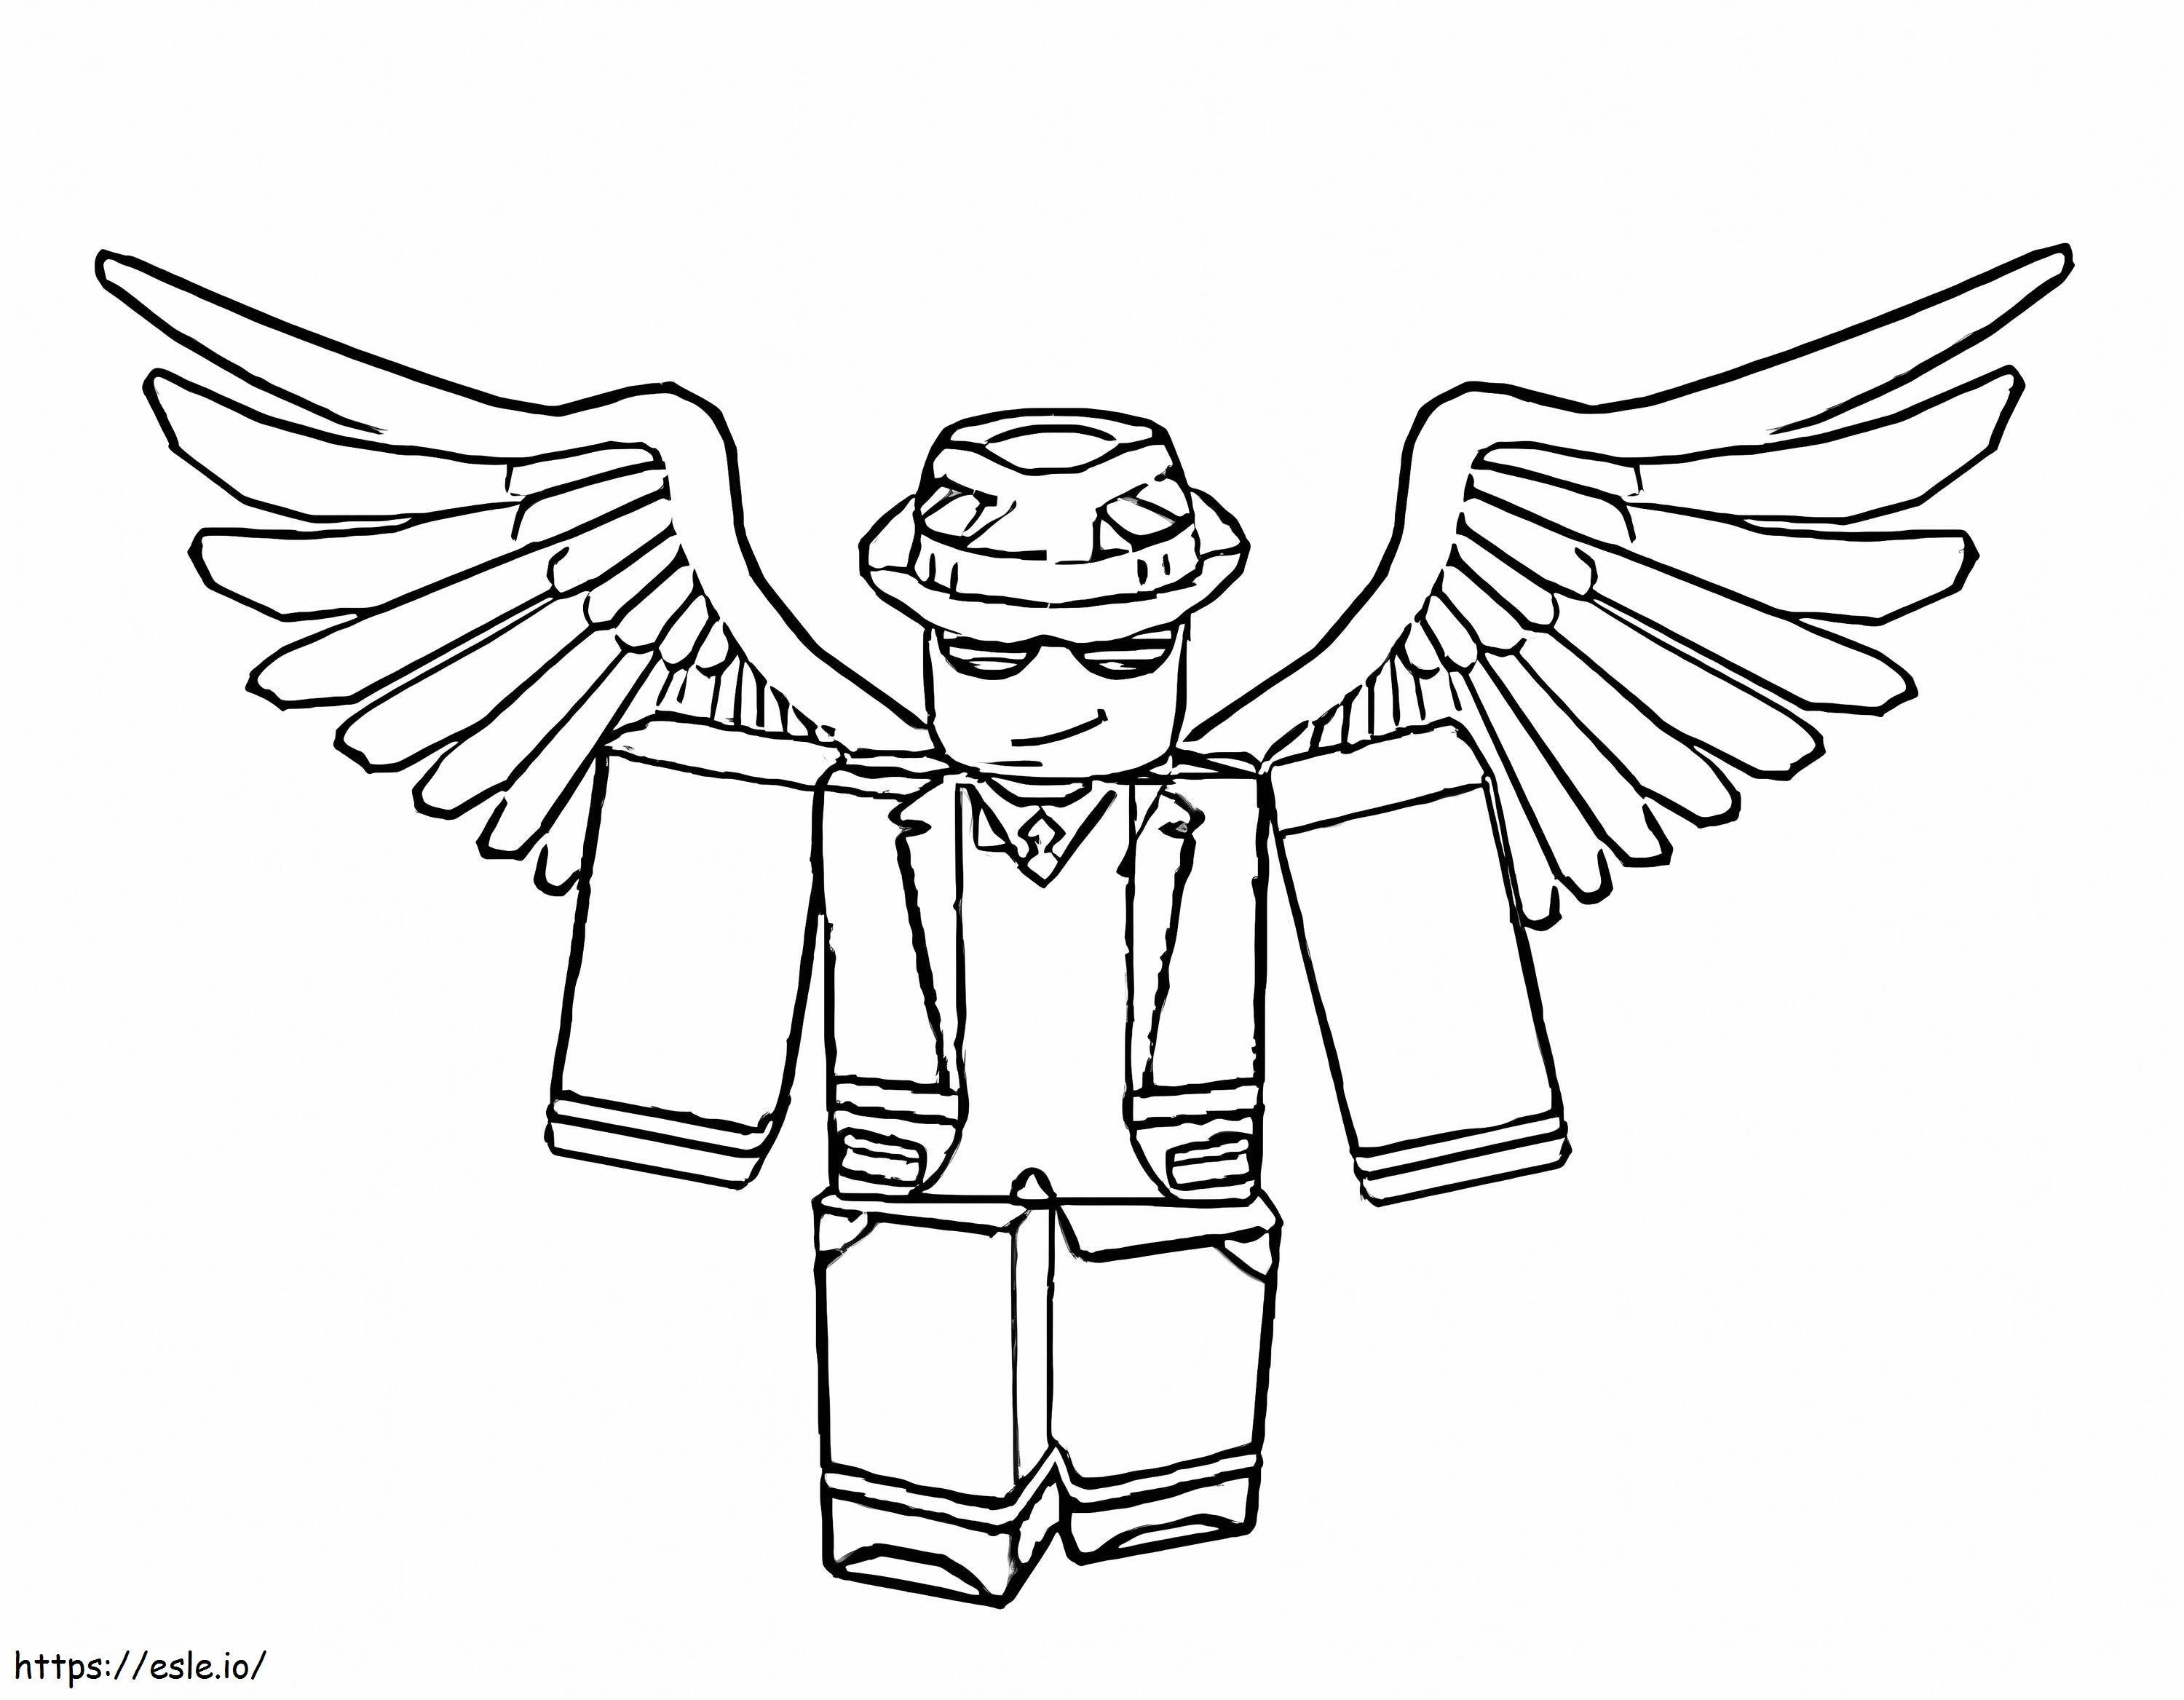 Cool Roblox Character With Wings coloring page